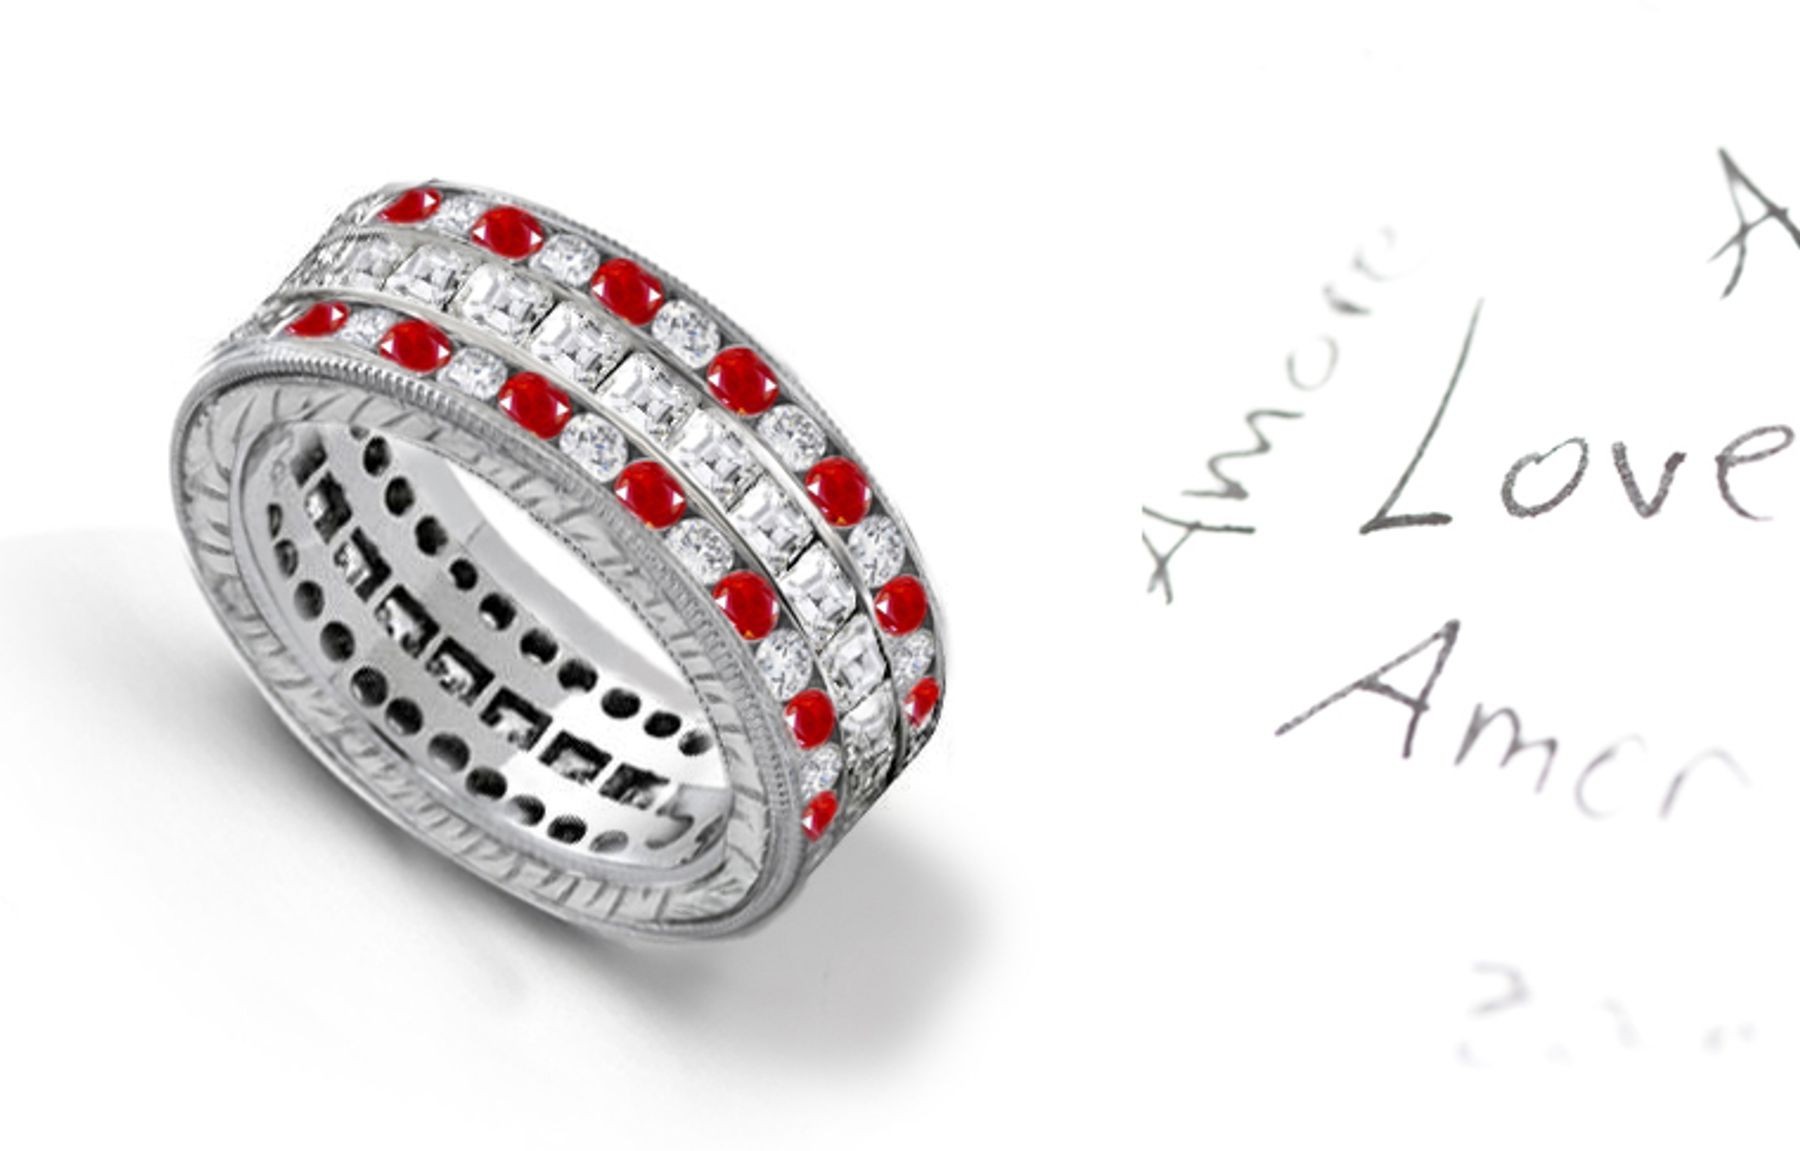 Sliding, Gliding: All That Glitters - Triple Stacked Diamond Eternity Bands